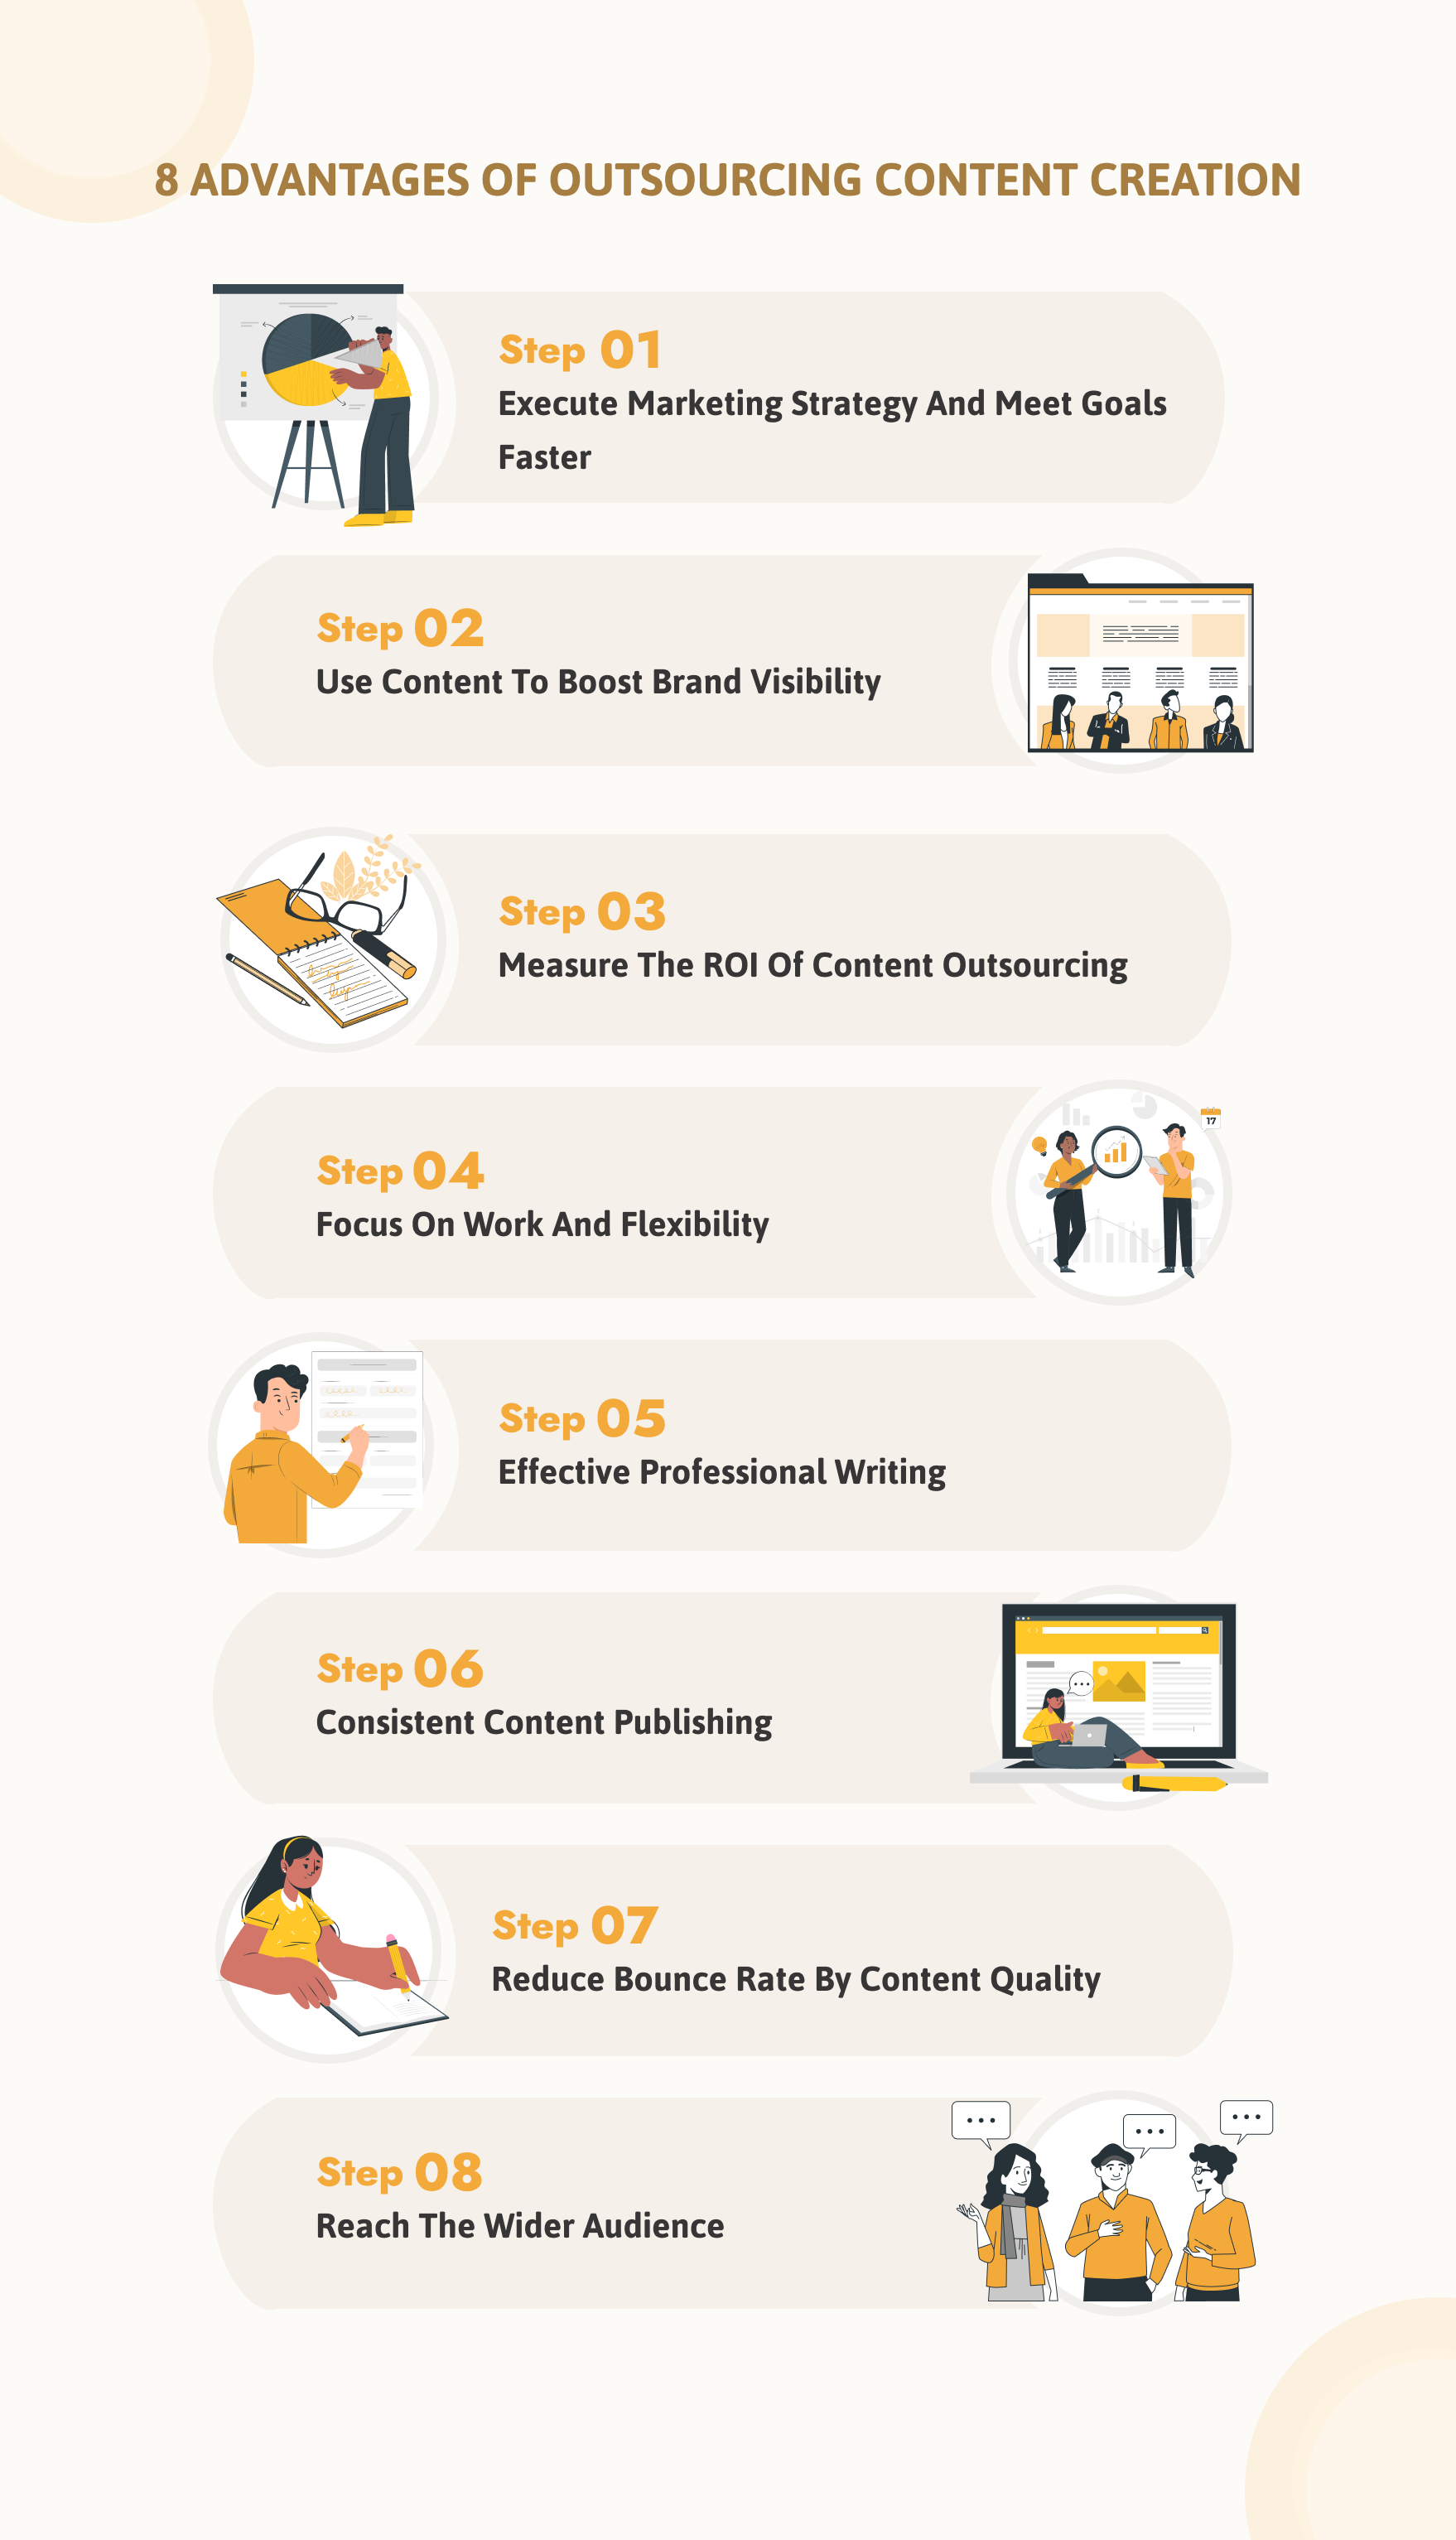 Advantages of outsourcing content creation - Infographic